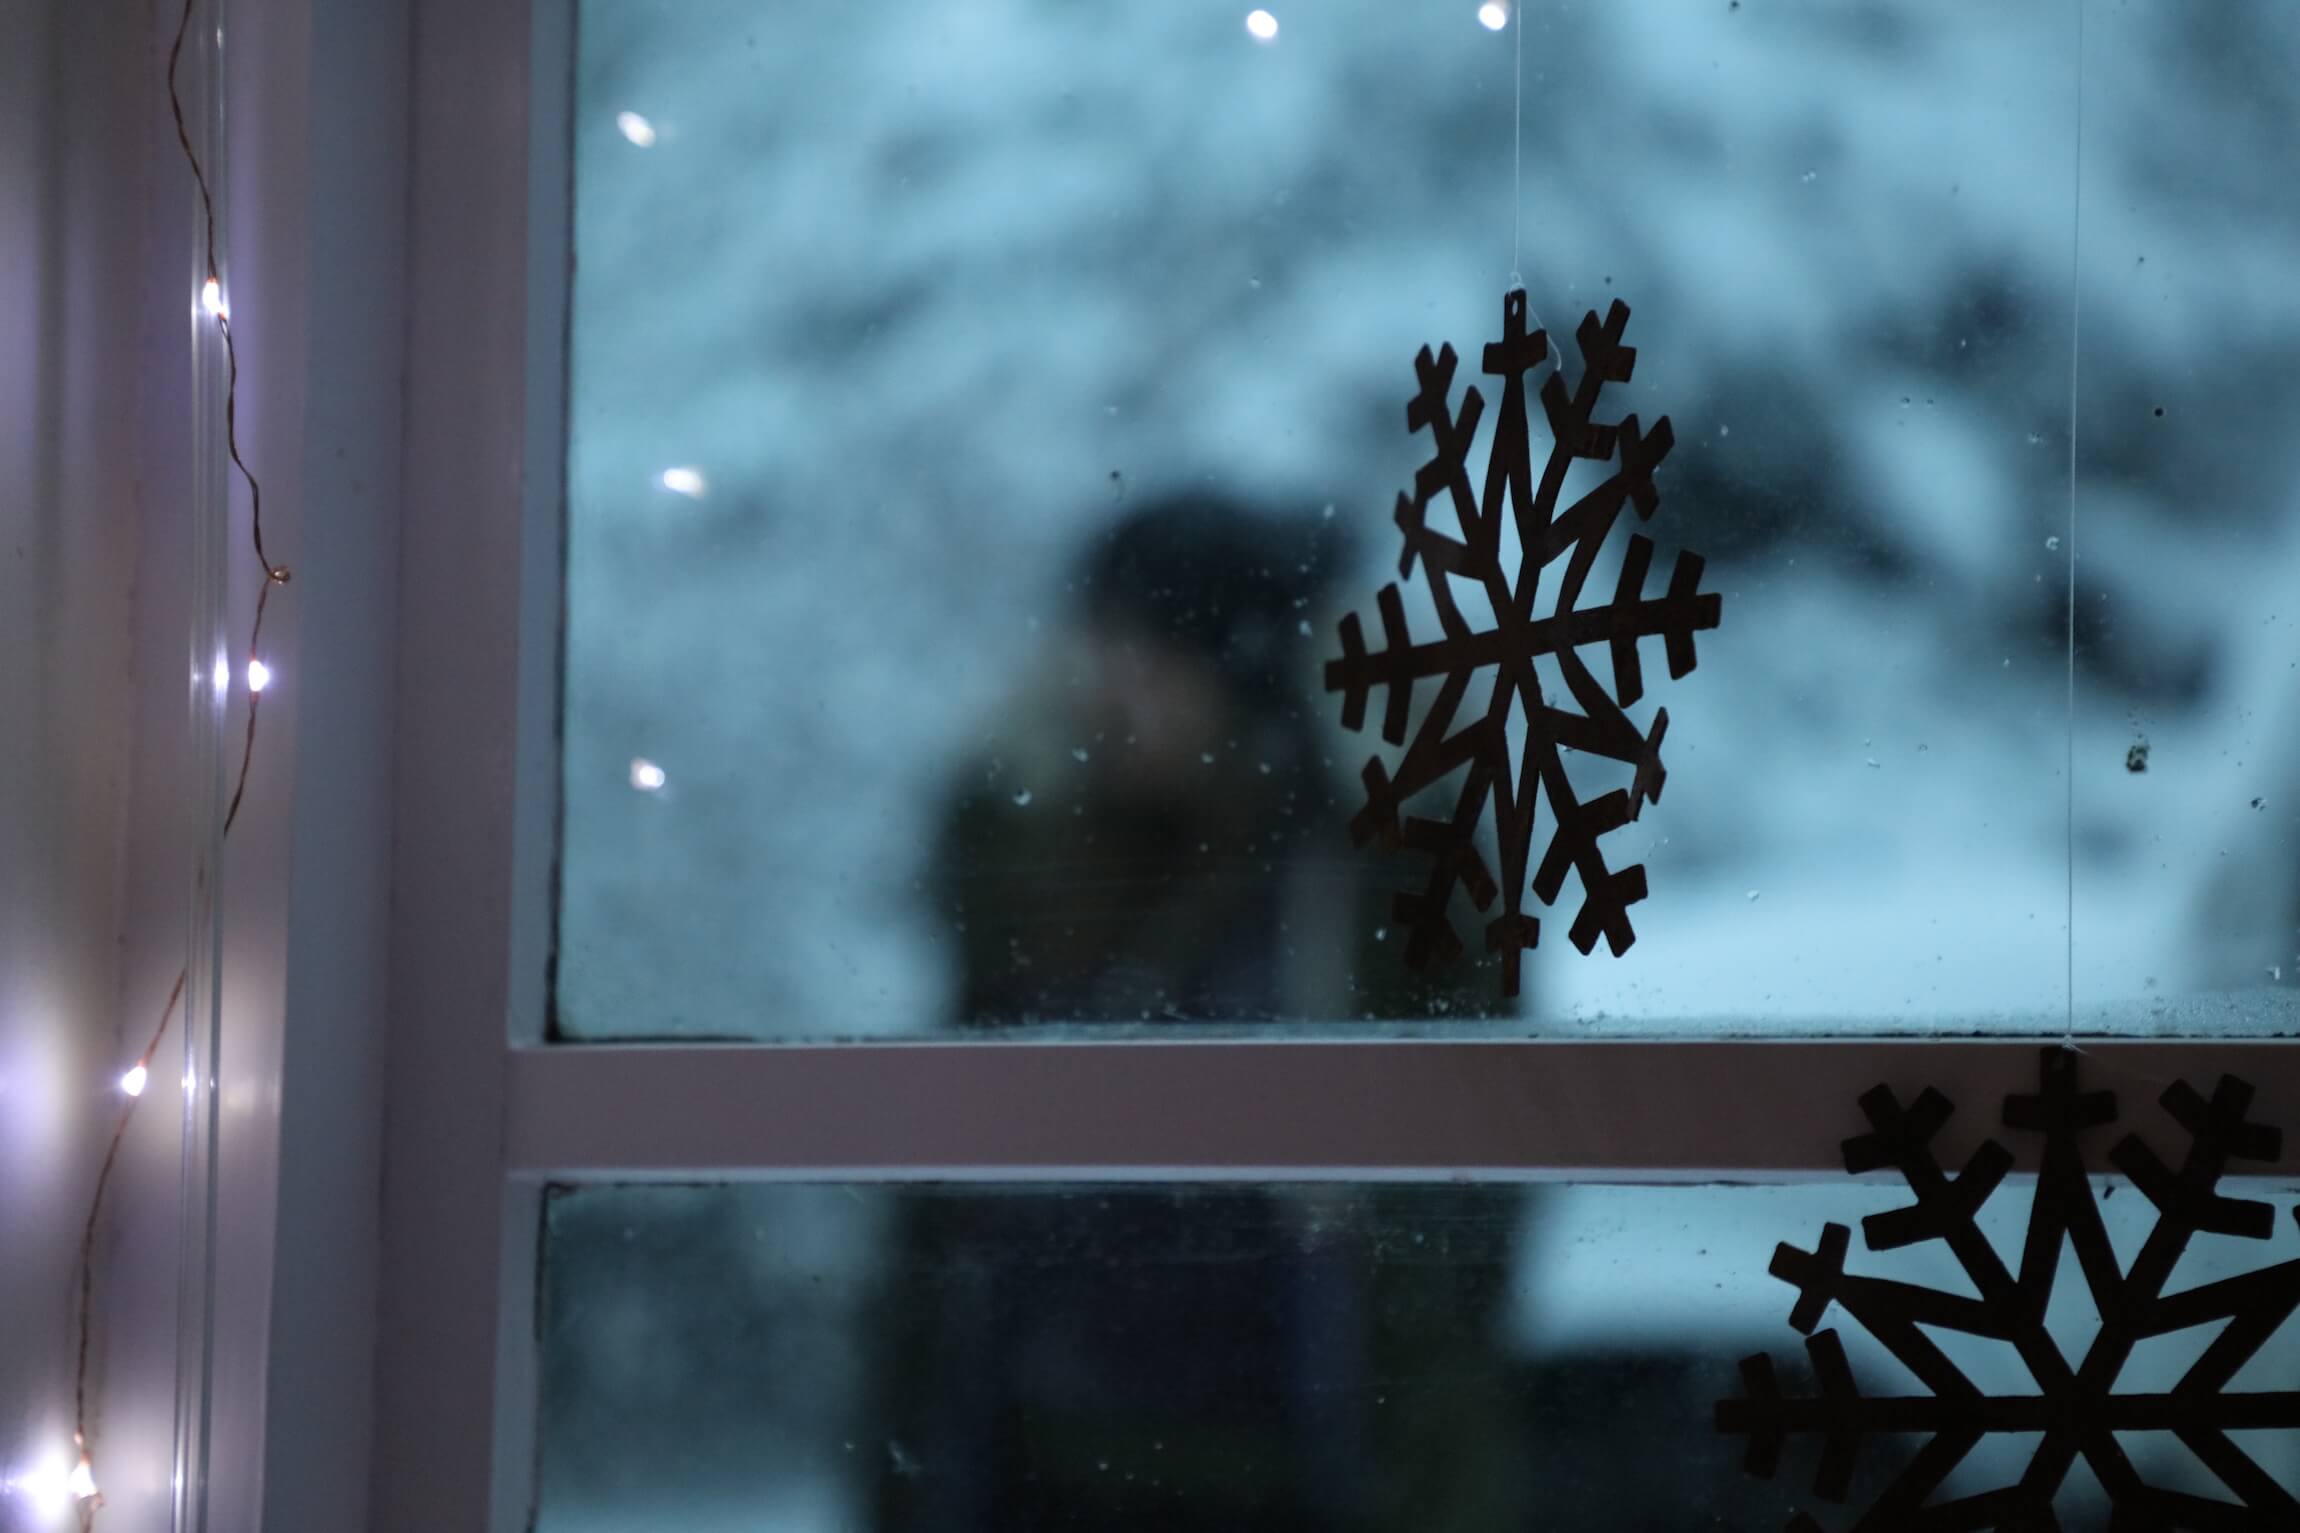 cortex snowflakes at a window with fairy lights and person walking, blue light and frosty